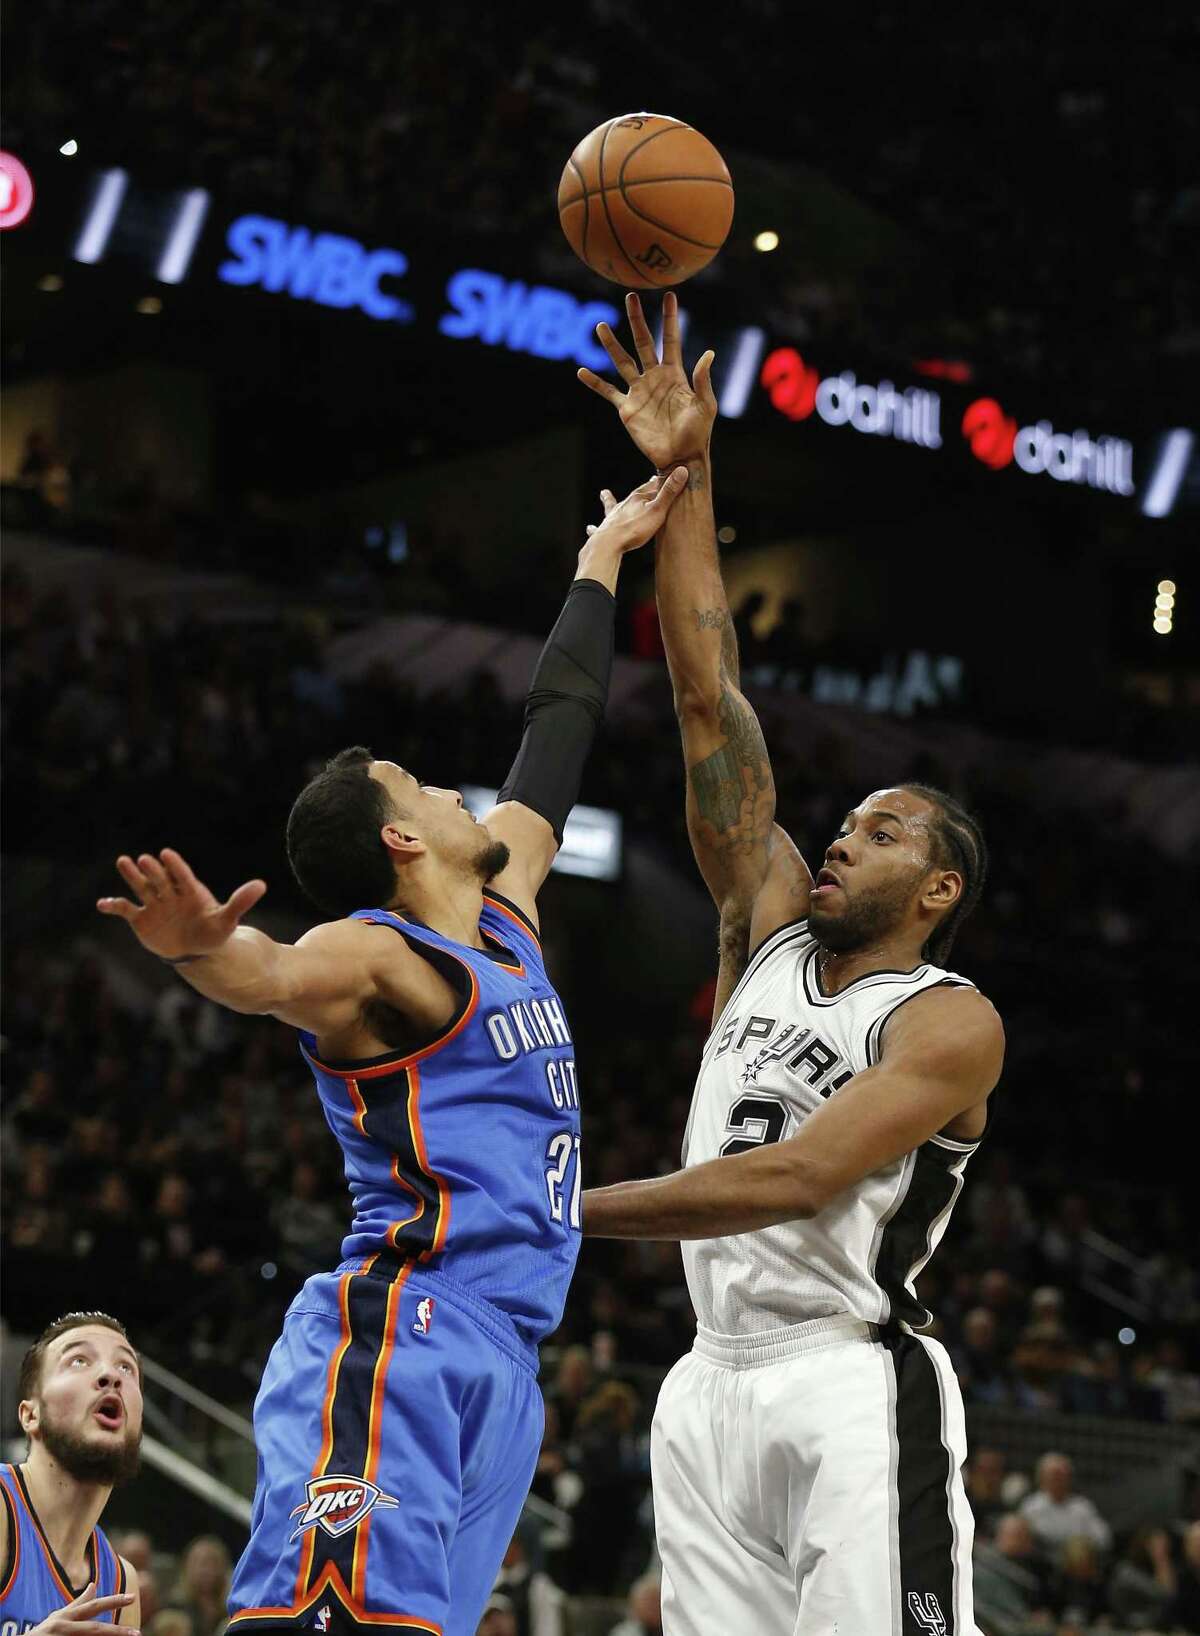 Spurs' Kawhi Leonard (02) shoots over Oklahoma City Thunders' Andre Roberson (21) during their game at the AT&T Center on Tuesday, Jan. 31, 2017. (Kin Man Hui/San Antonio Express-News)